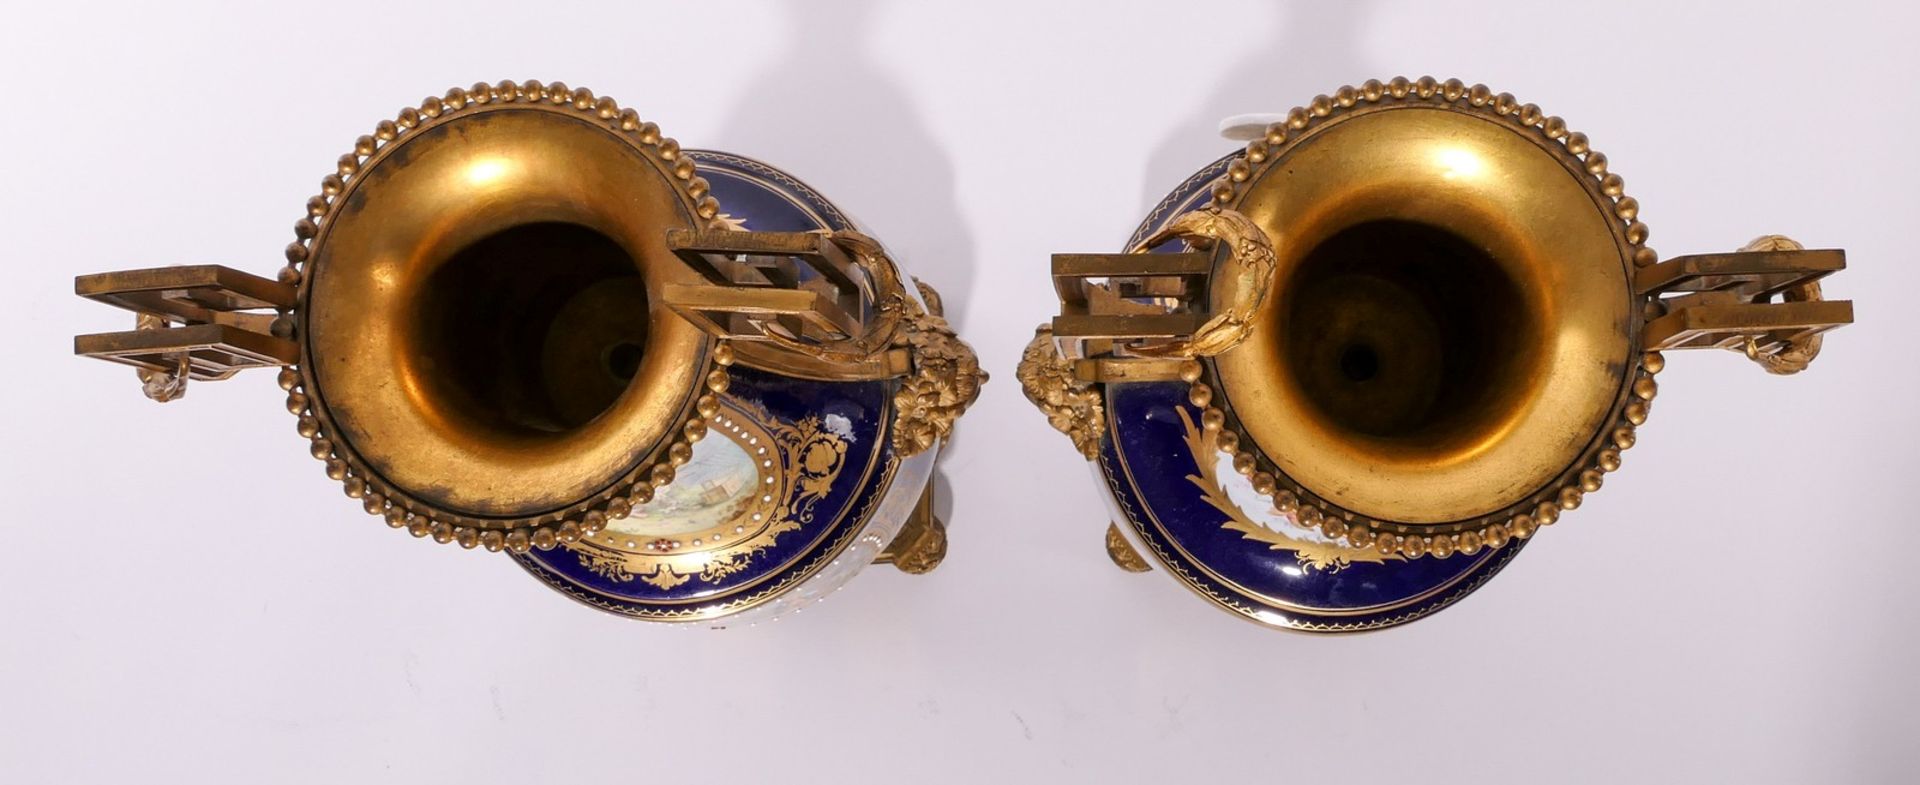 A pair of Neoclassical vases in Sèvres-porcelain, blue royale ground, the front with gilt cartouches - Image 7 of 11